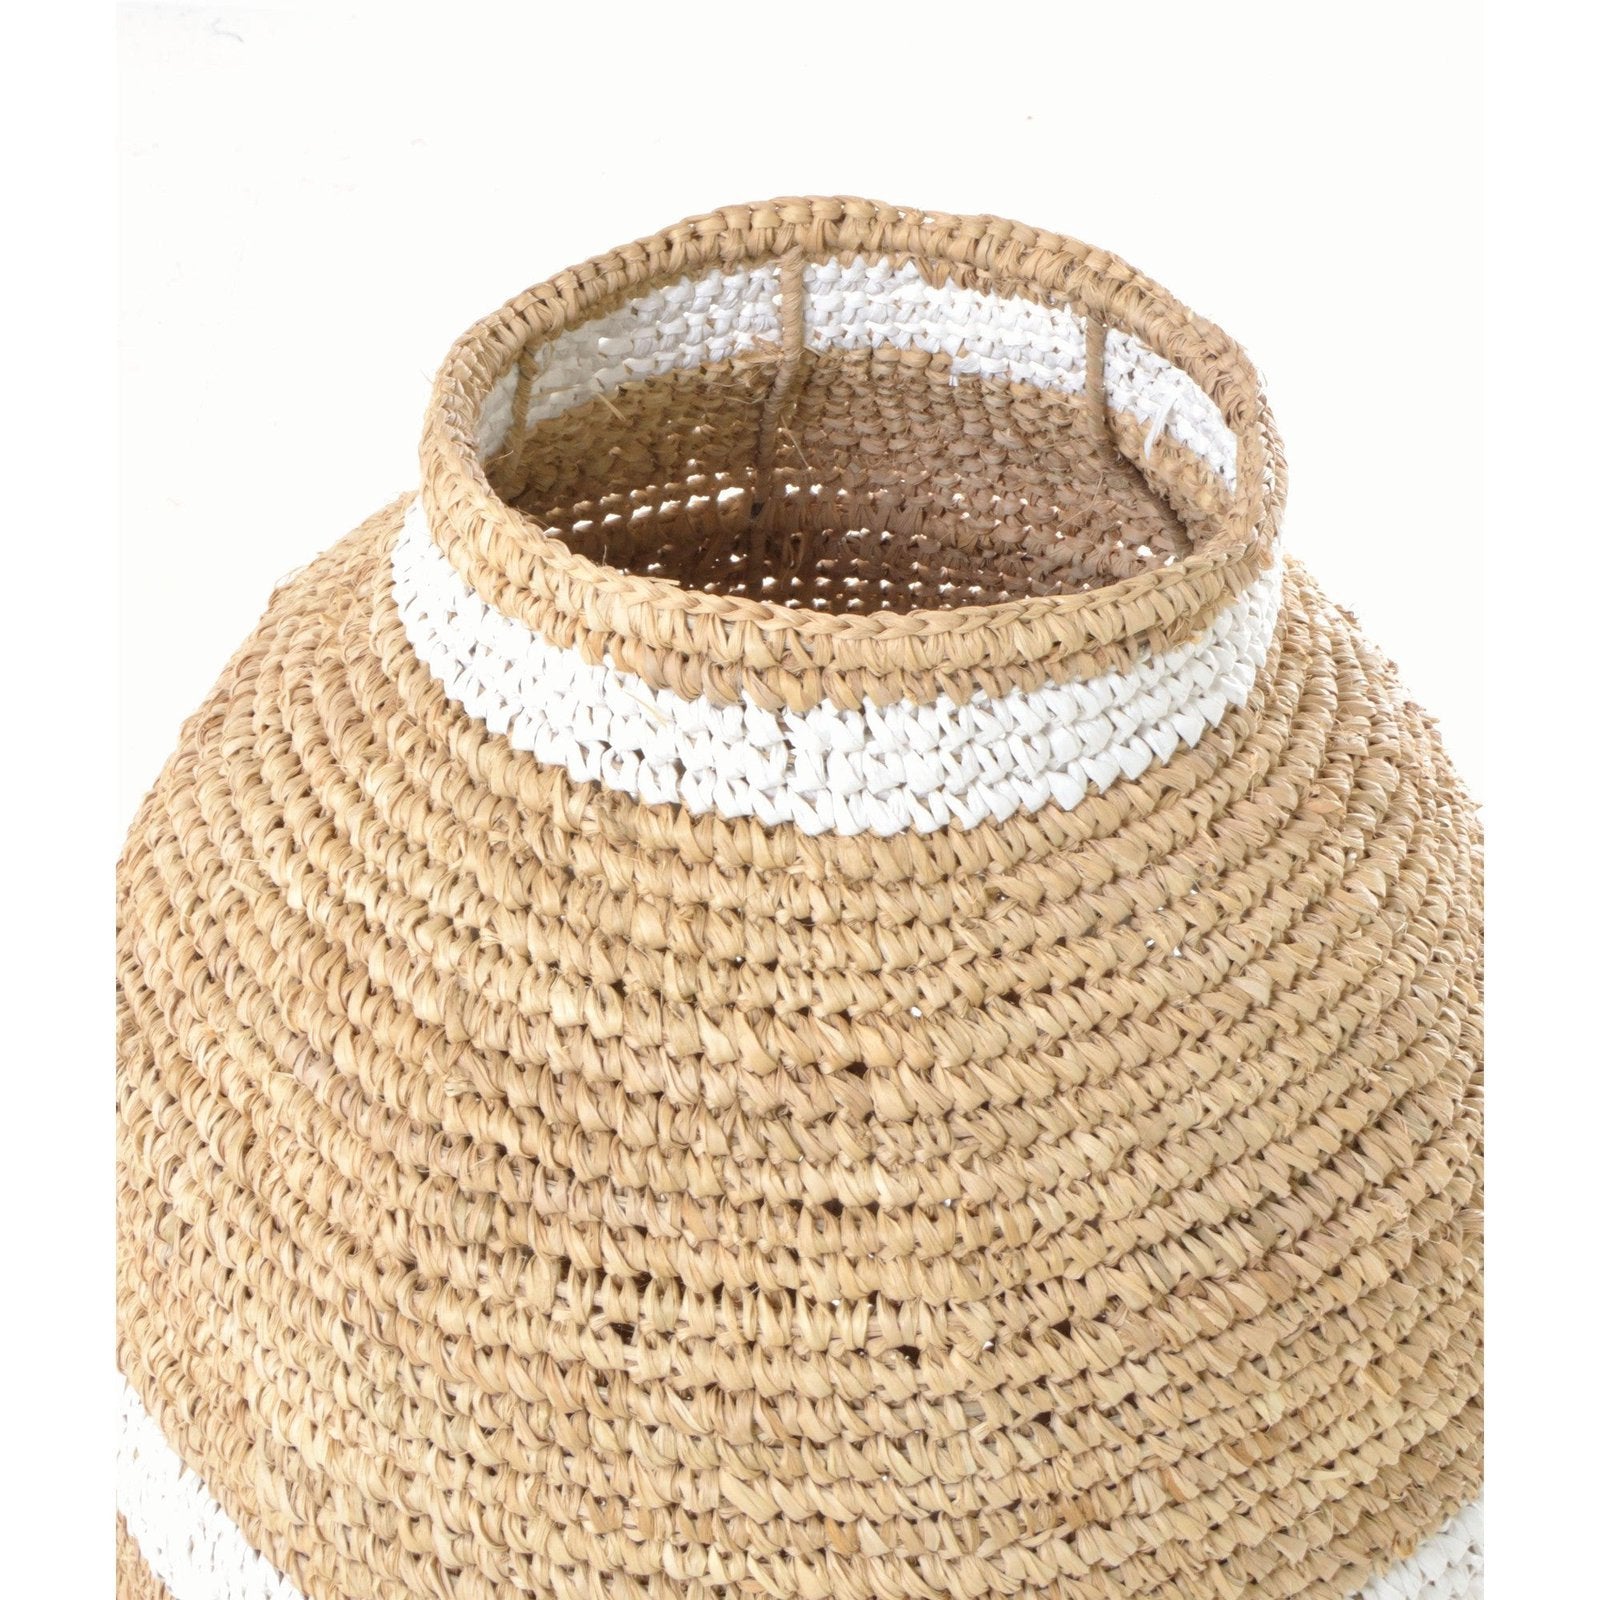 Woven Urn Basket with Narrow Stripes